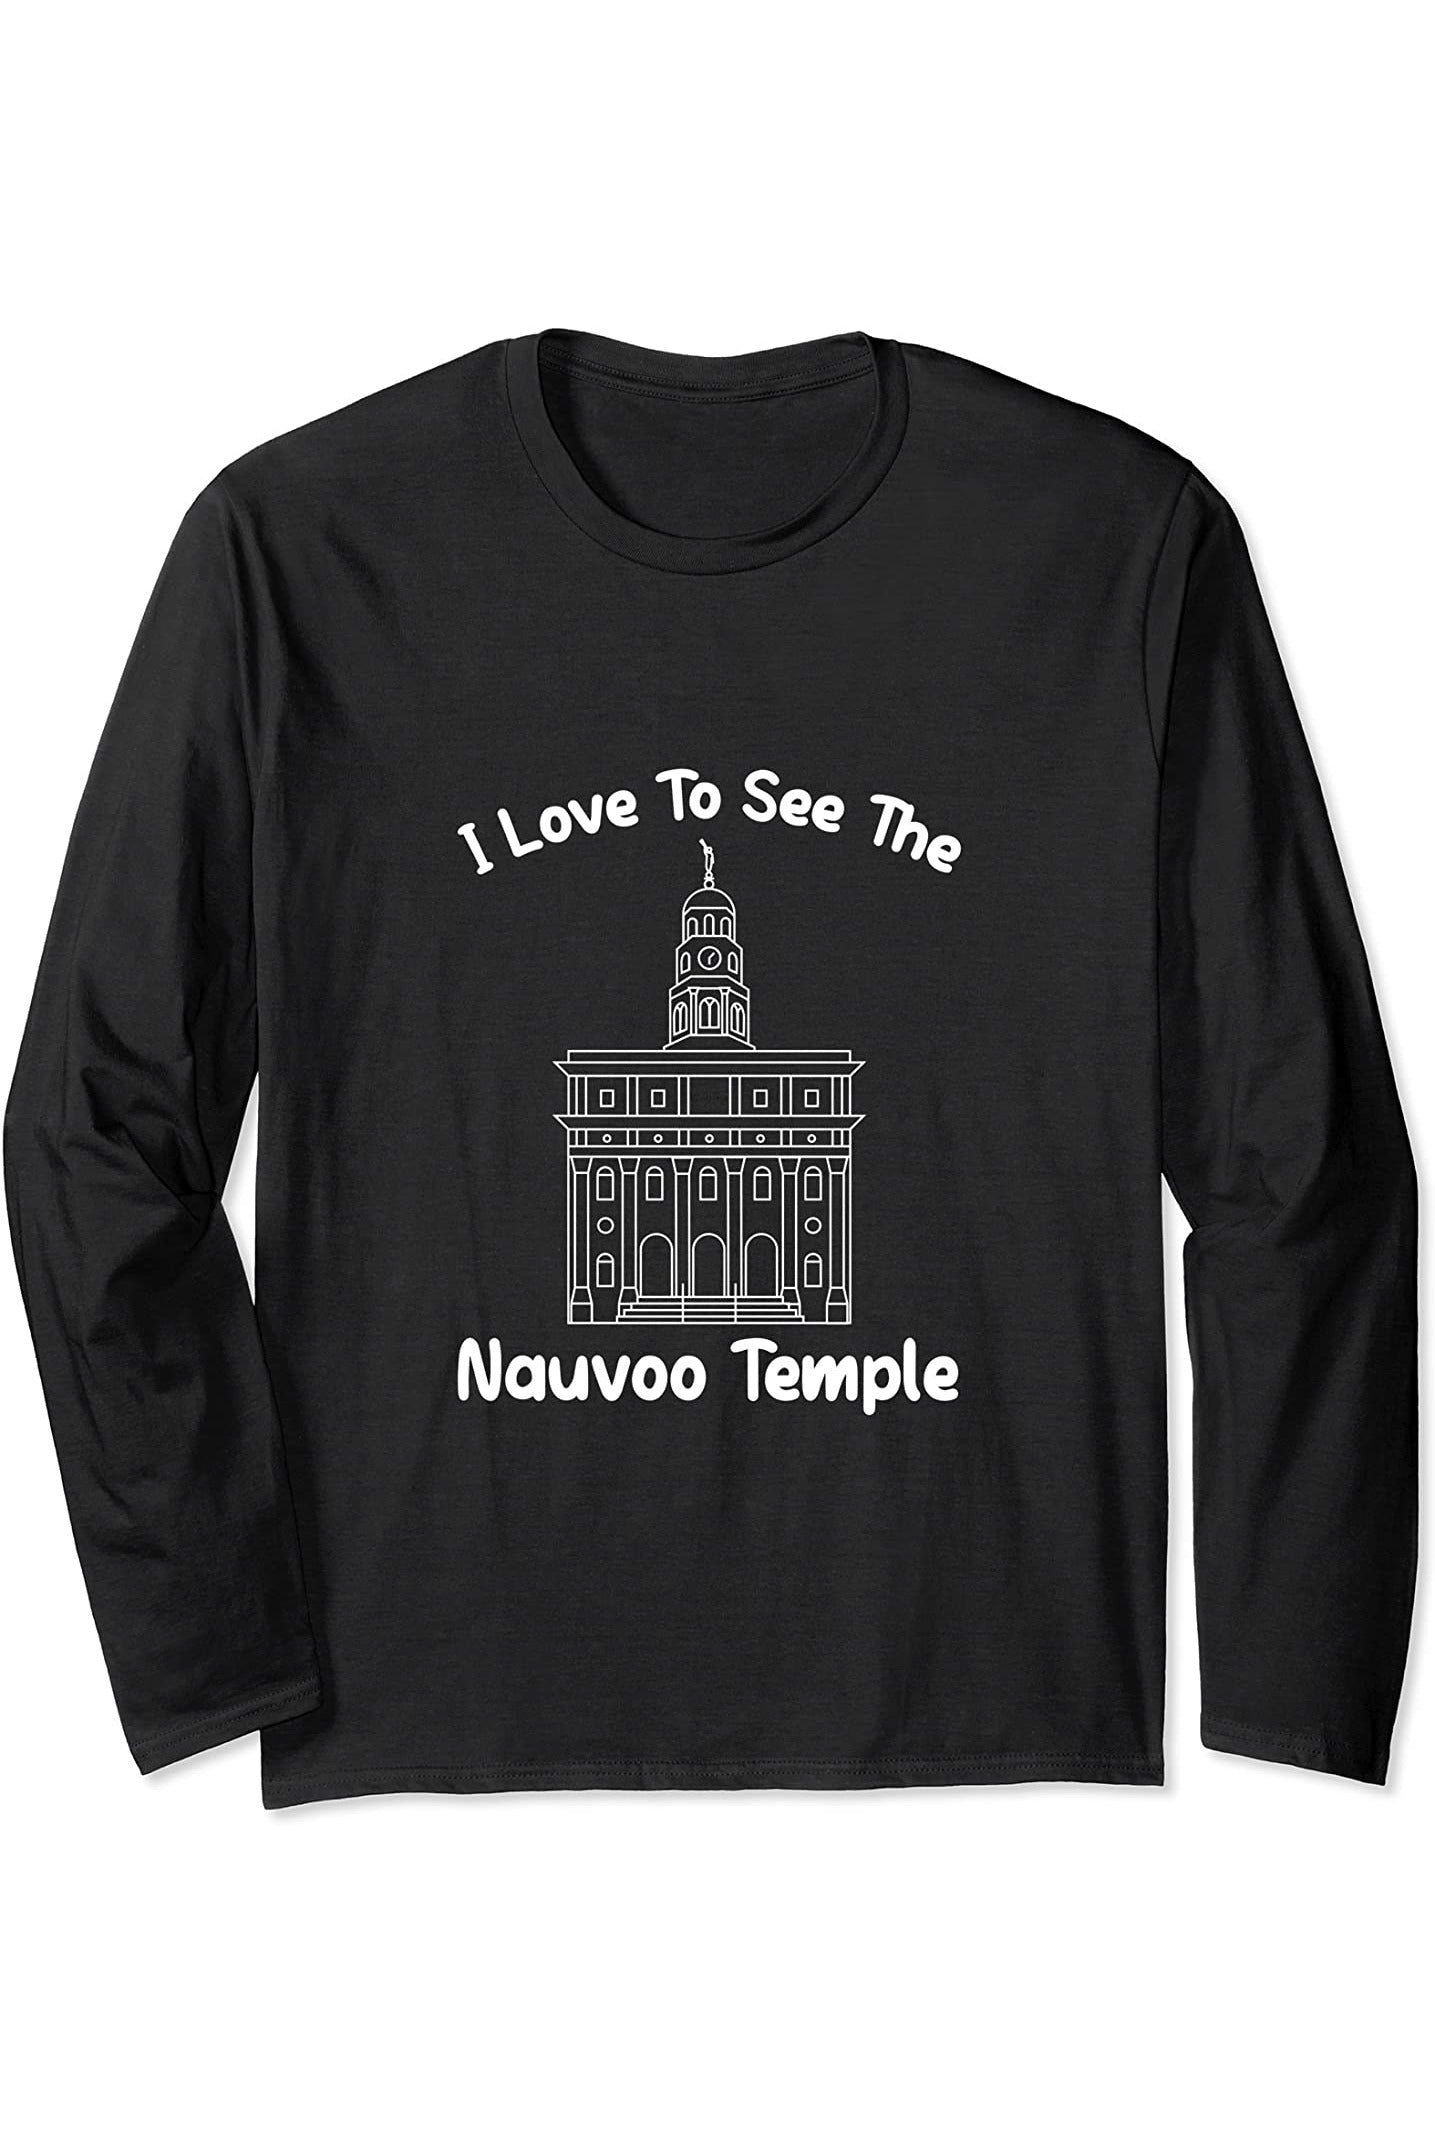 Nauvoo IL Tempel, I love to see my temple, primary Long Sleeve T-Shirt